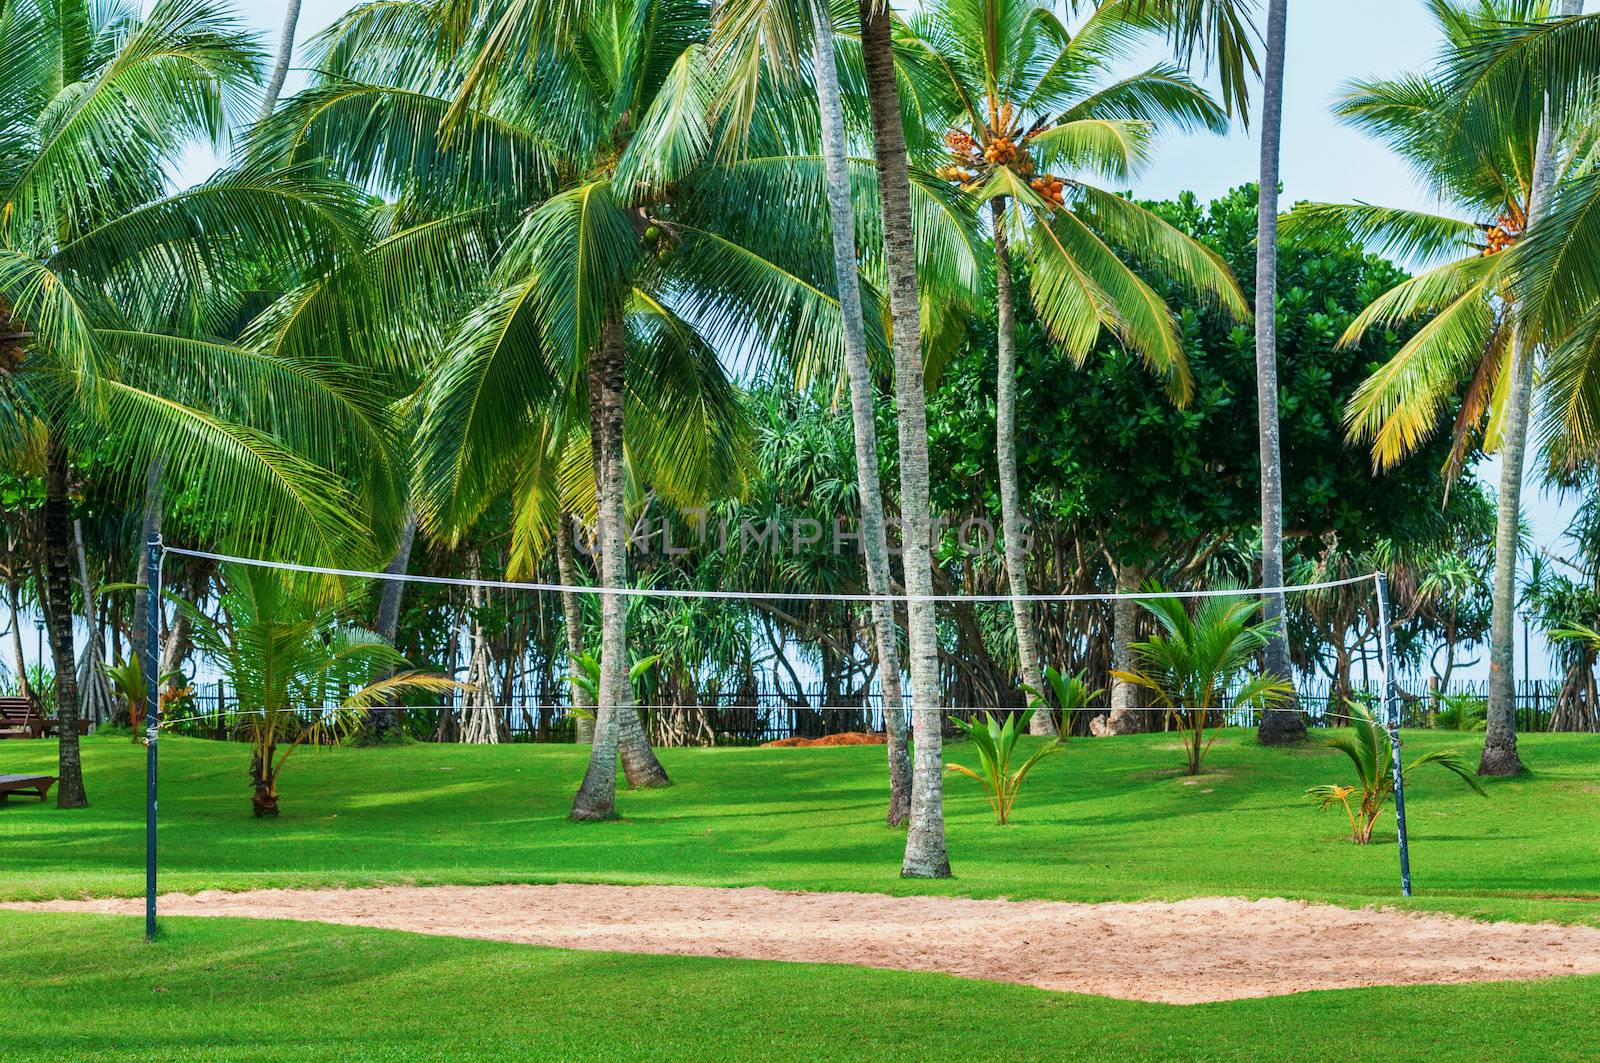 Tropical vacation resort with volleyball court, palm trees and green grass. Focus on the net.